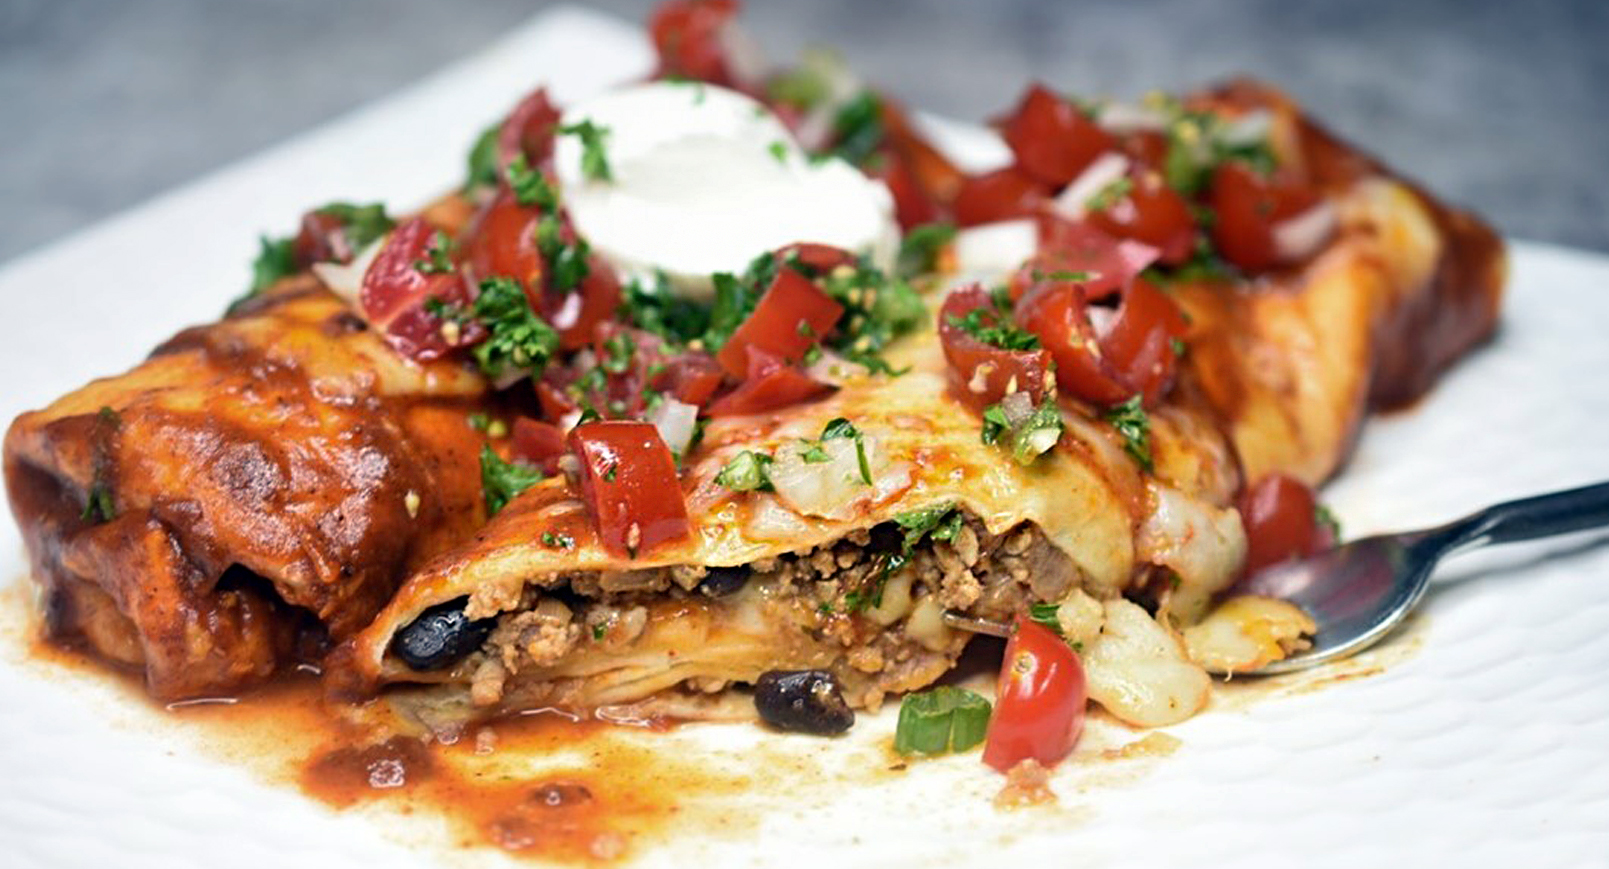 Fiesta with Veal Online Cooking Class Wins Raves From Consumer Viewers